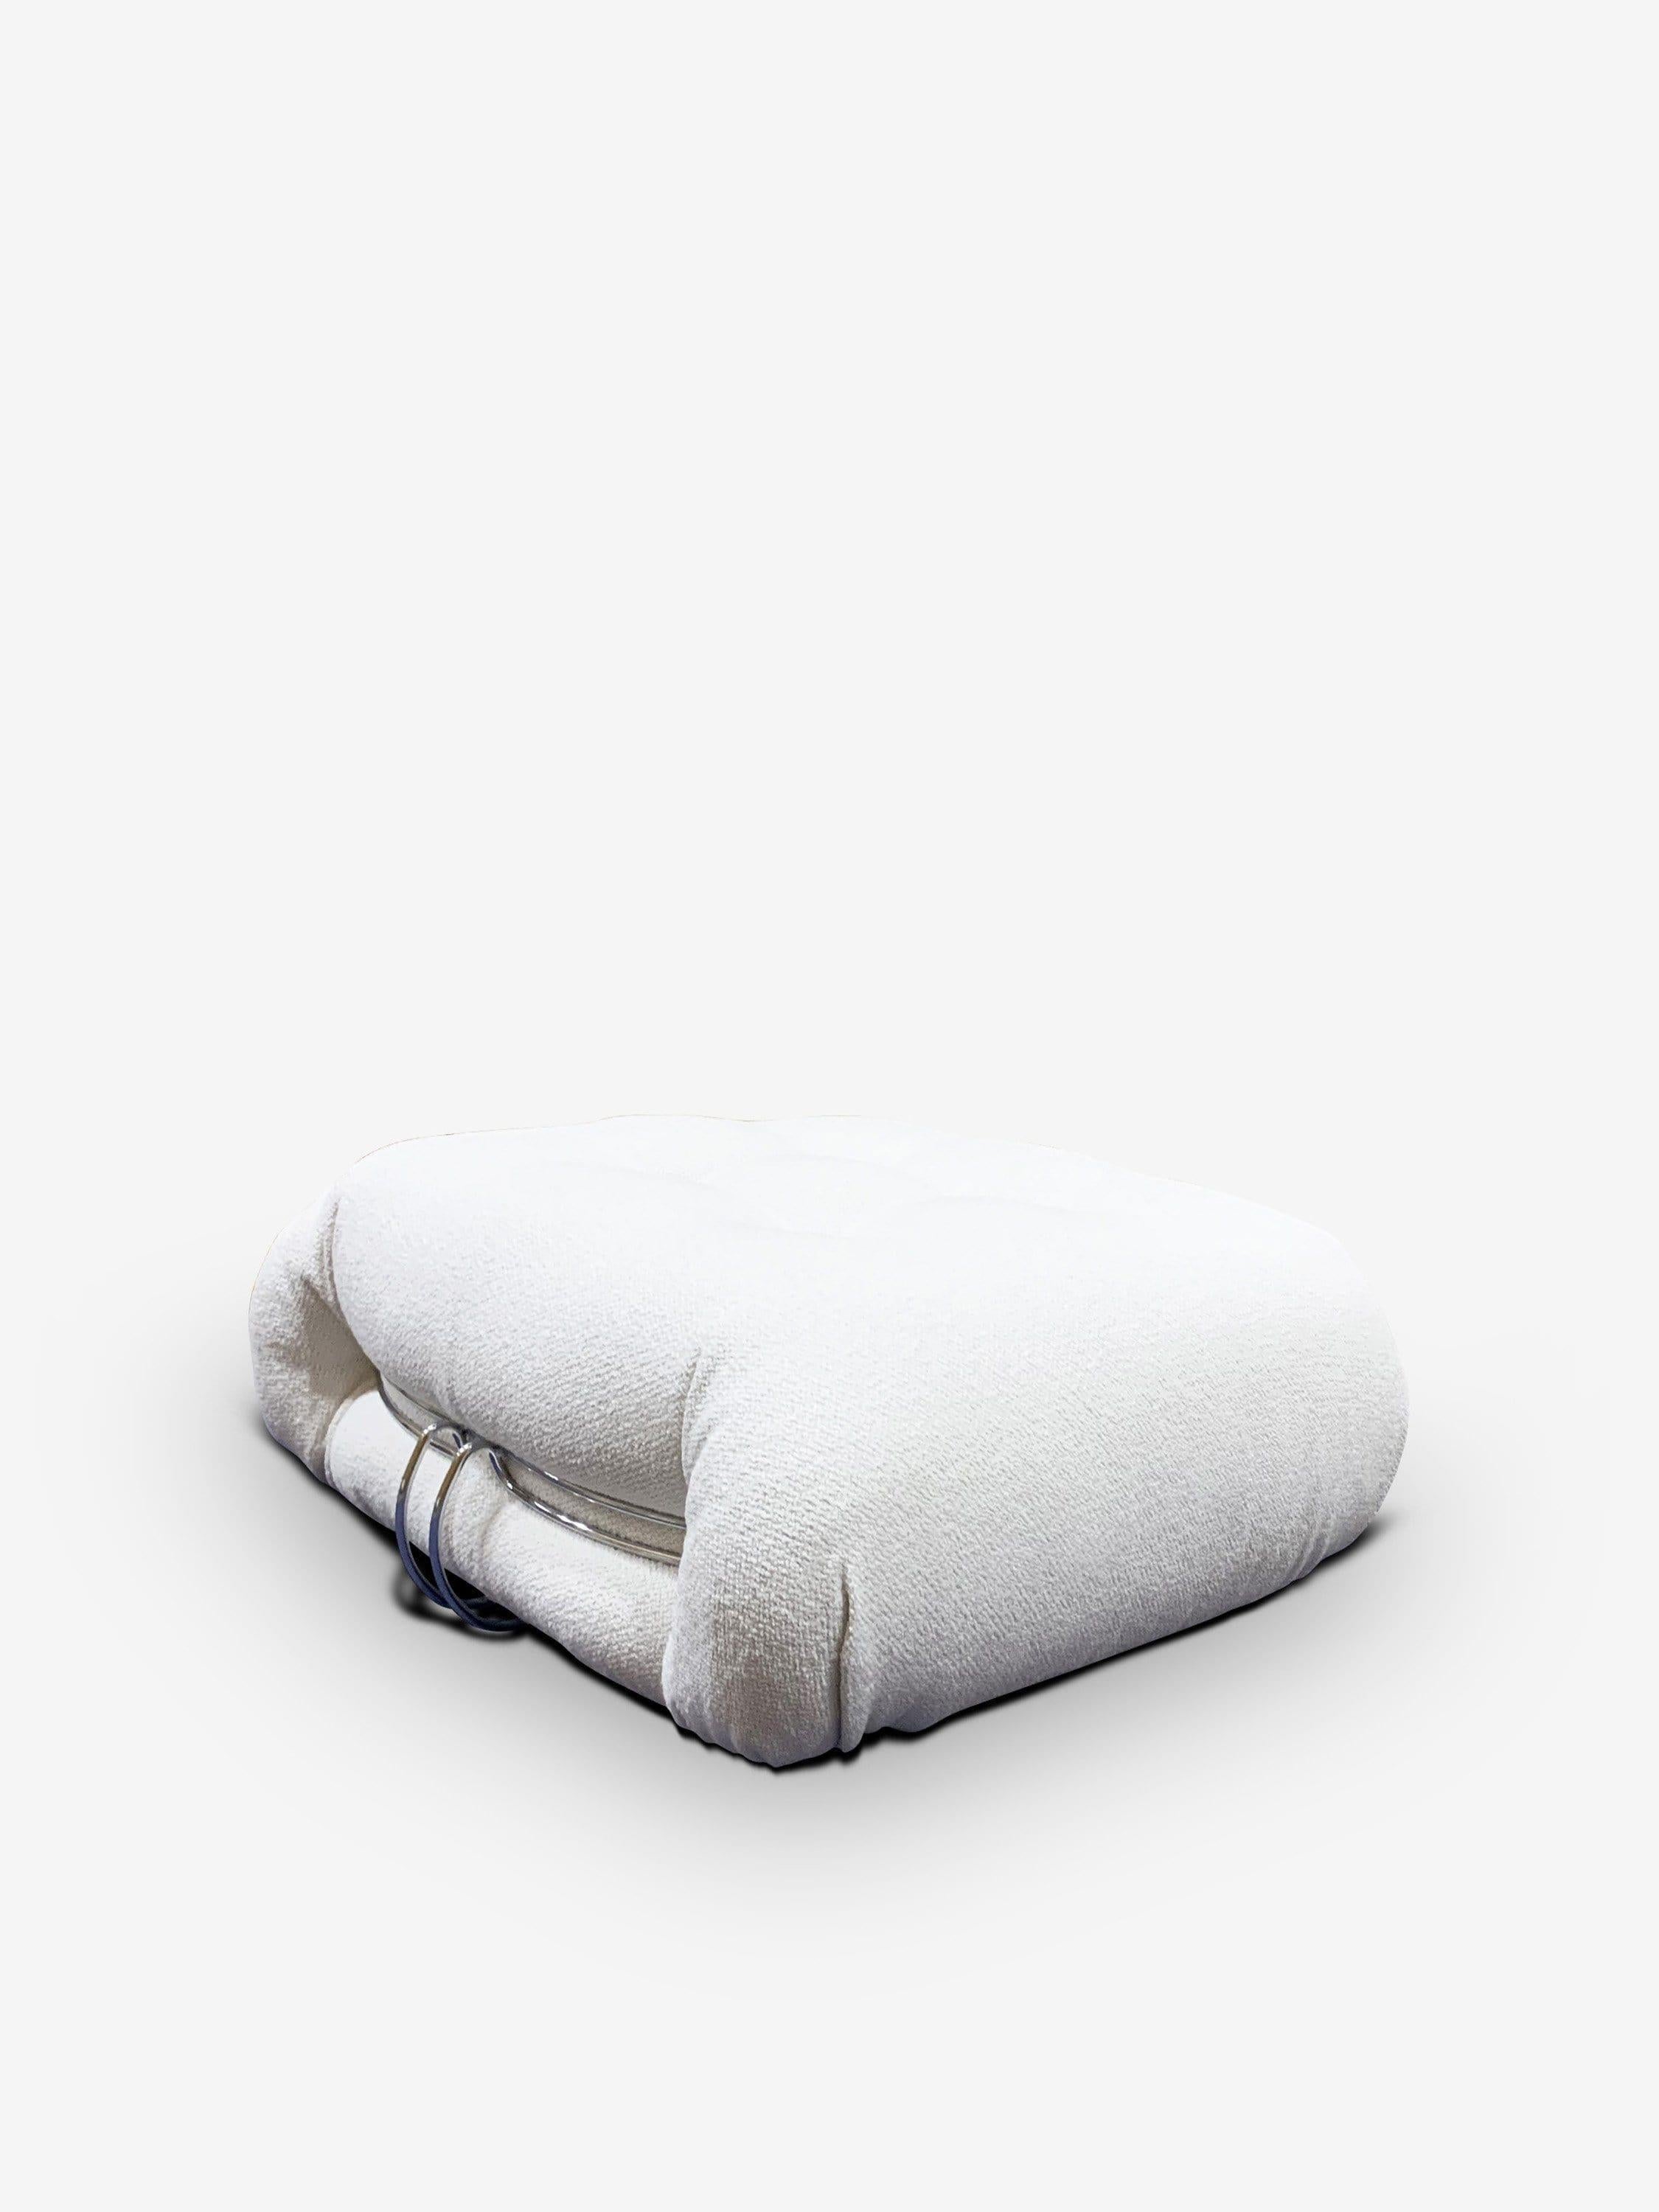 944 Soriana Ottoman in Tess Look Bianco by Cassina In New Condition For Sale In Sag Harbor, NY